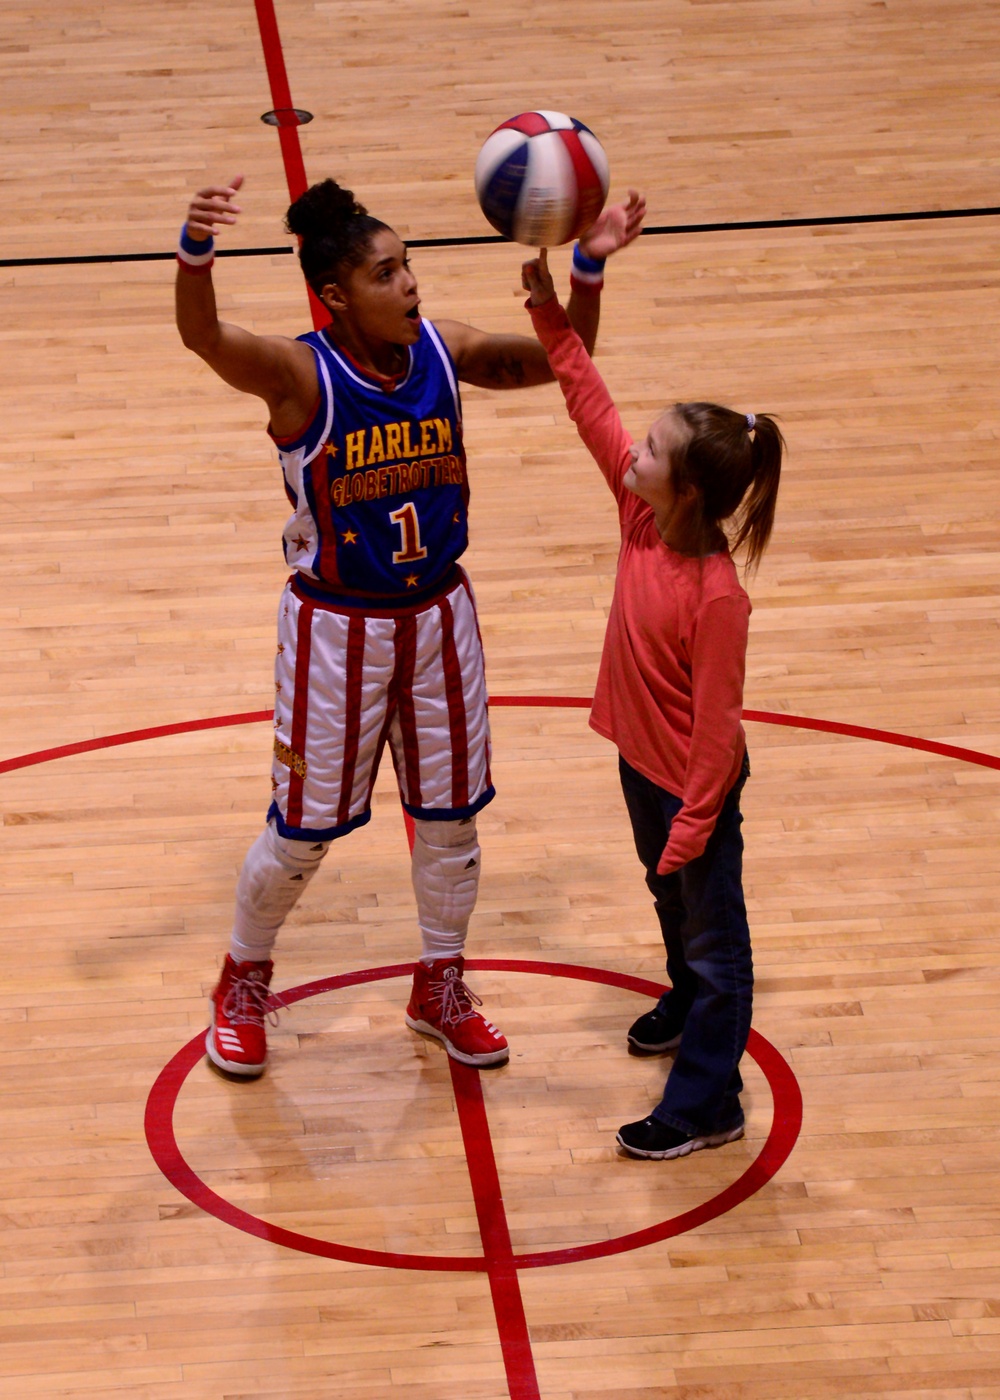 The Harlem Globetrotters bring their A Game to Osan